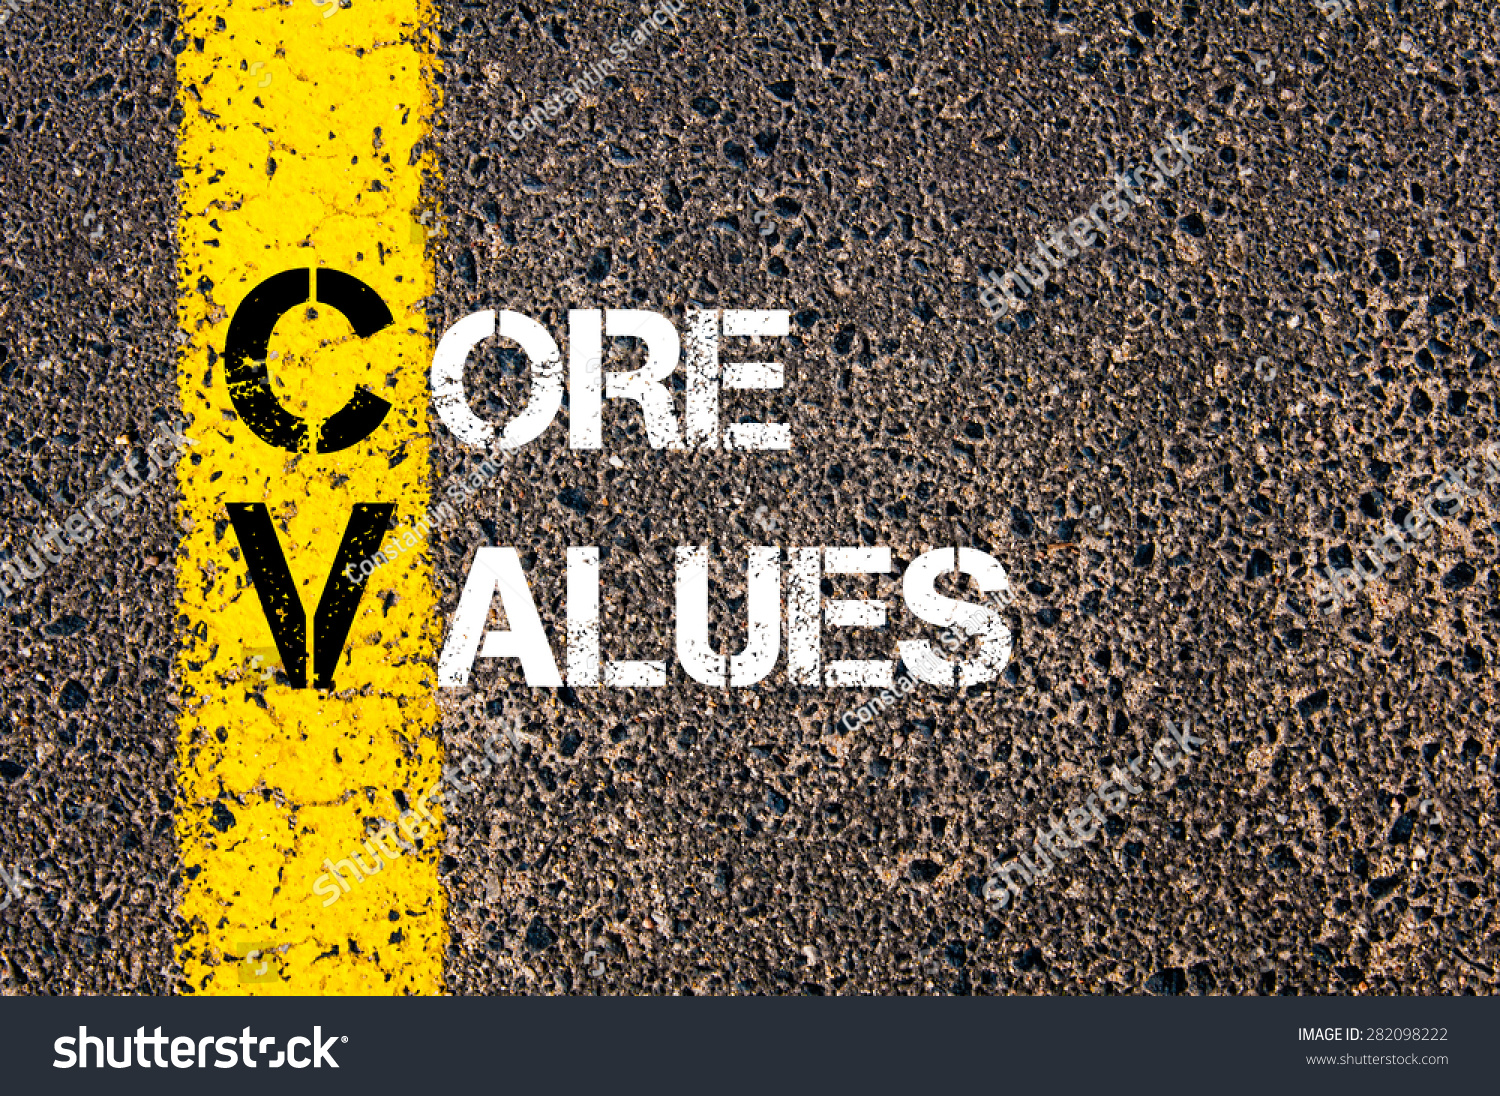 concept image of business acronym cv as core values written over road marking yellow paint line